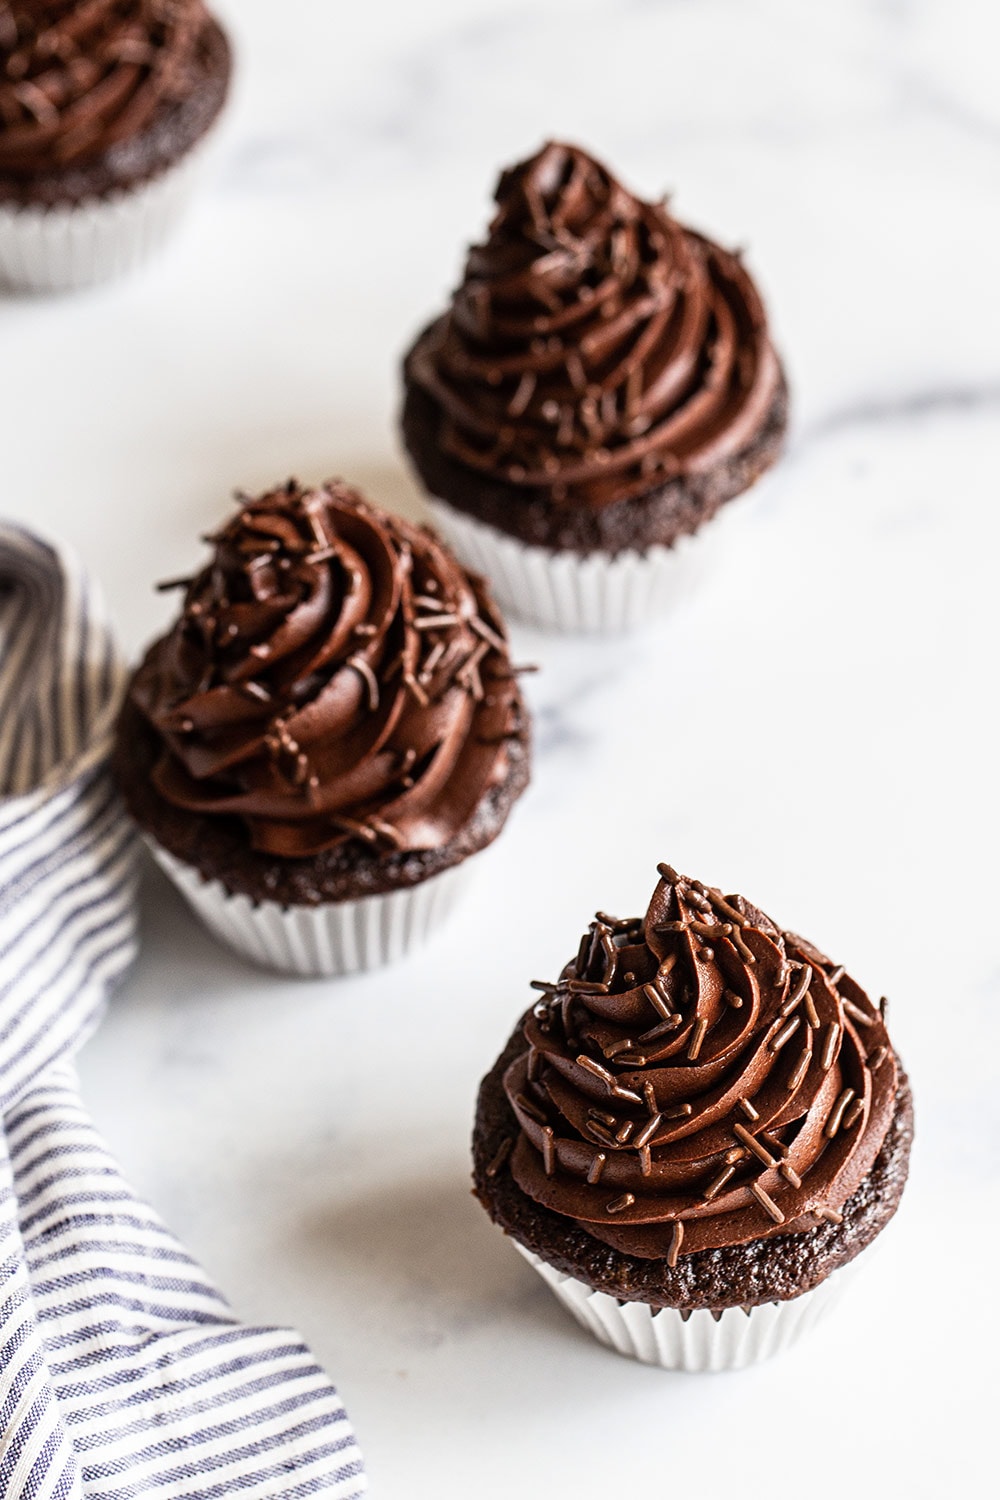  cupcakes with chocolate frosting on a white background